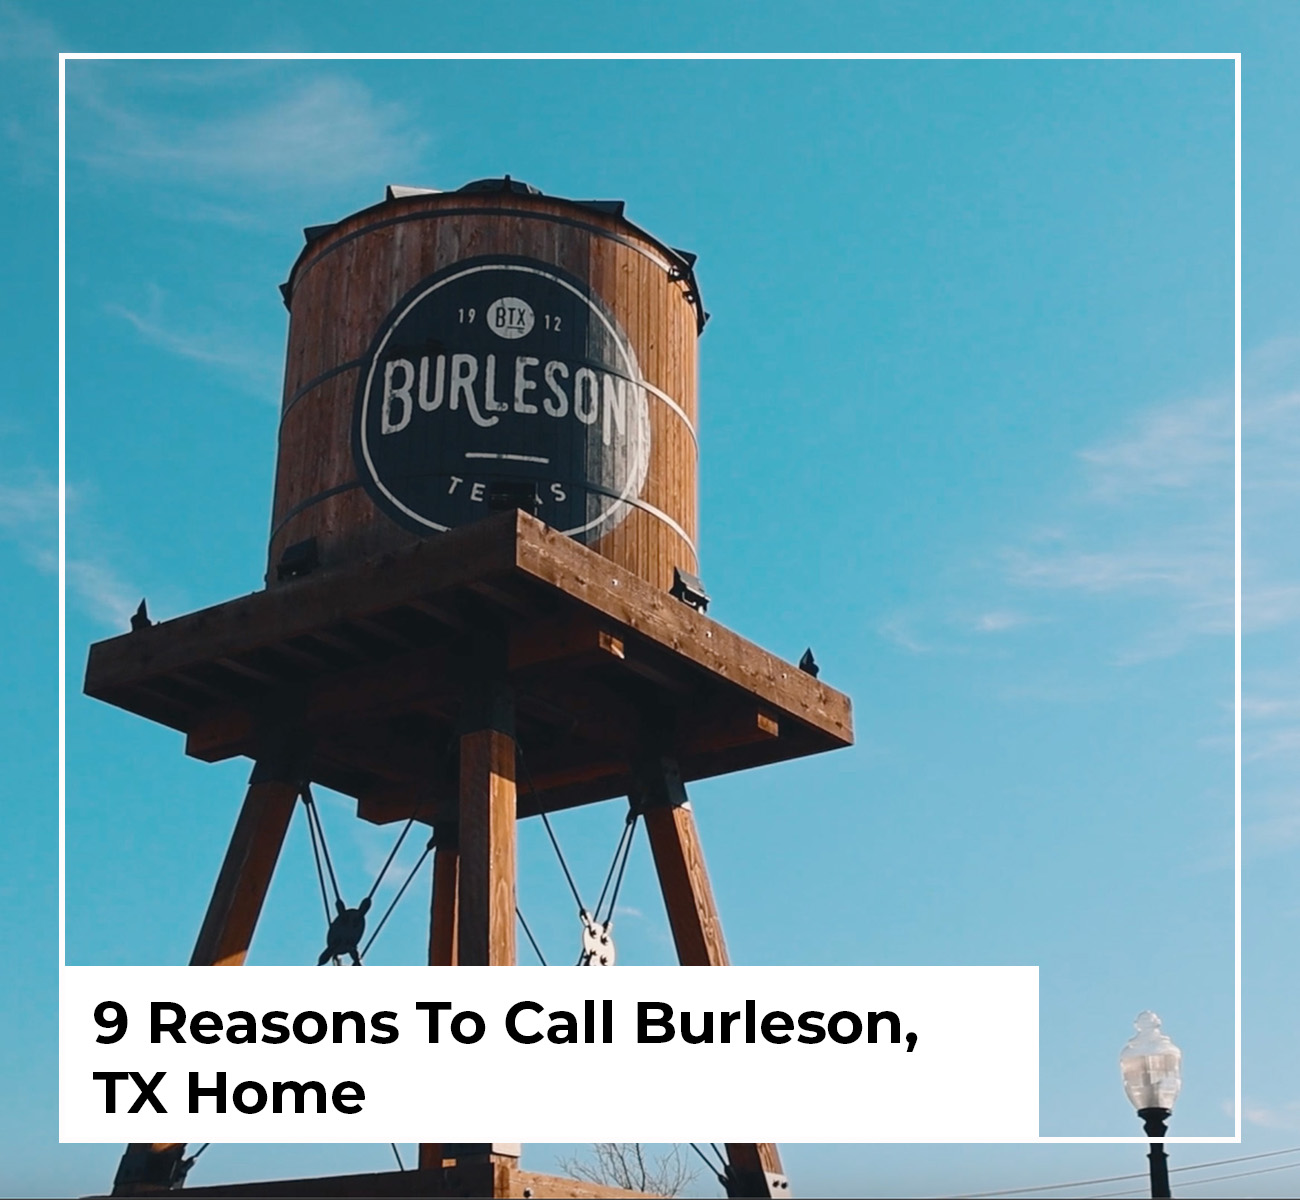 9 Reasons To Call Burleson, TX Home